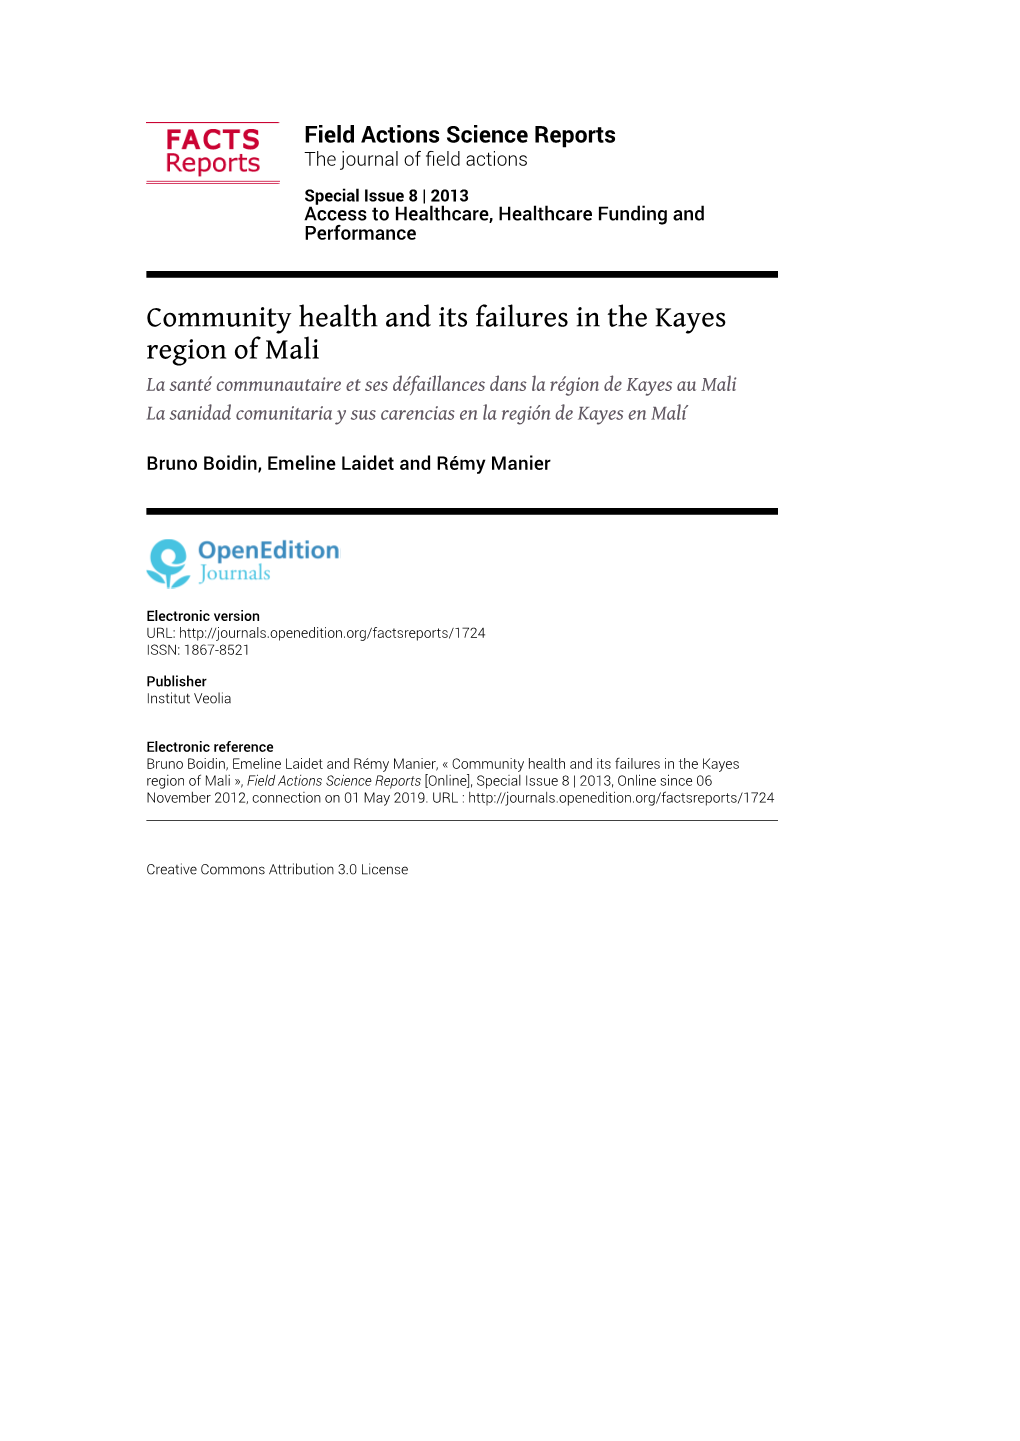 Community Health and Its Failures in the Kayes Region of Mali